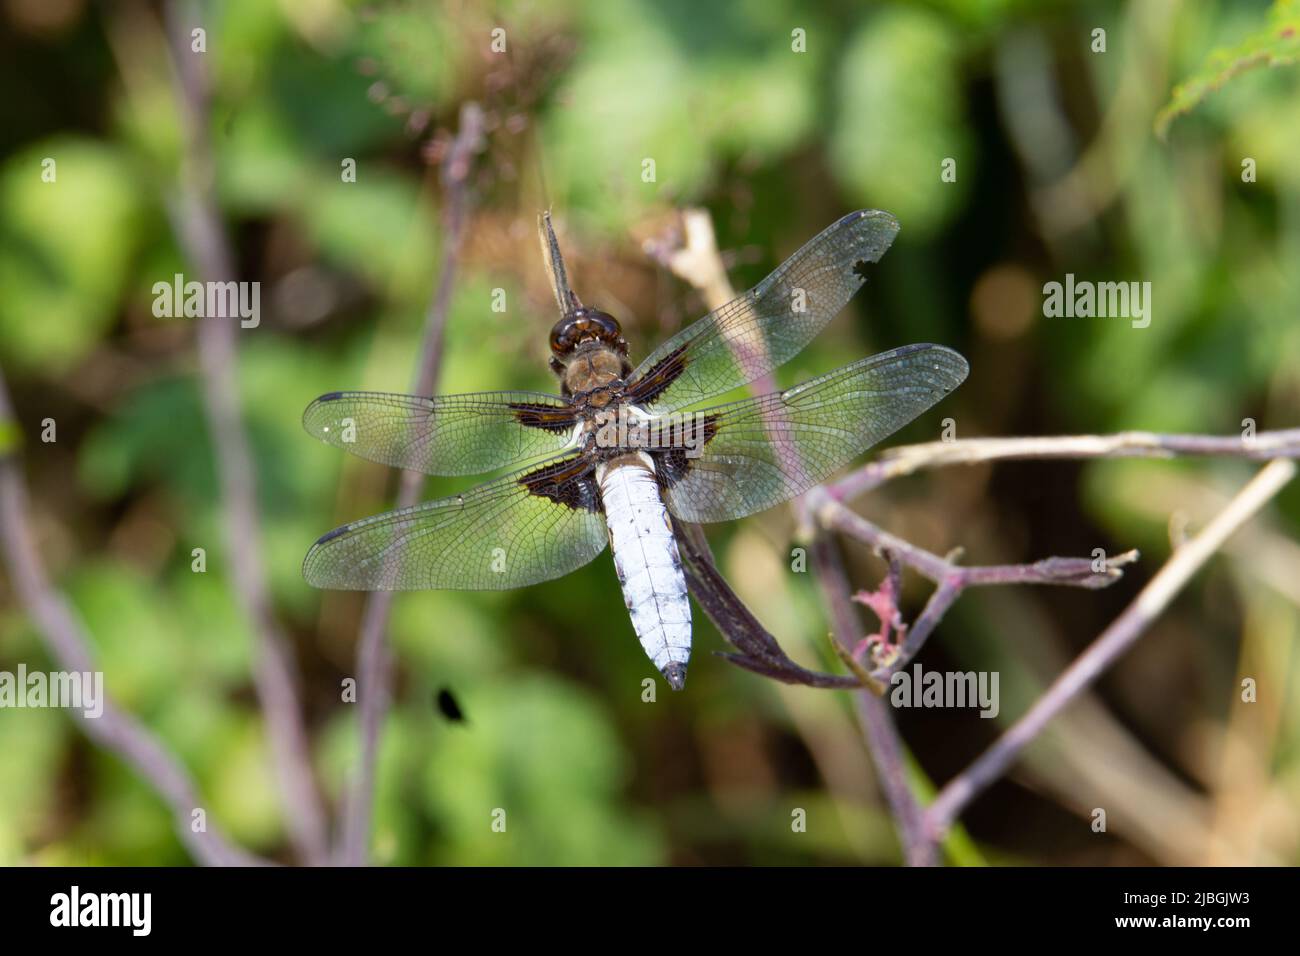 broad-bodied chaser (Libellula depressa) broad bodied chaser dragonfly resting on a dead twig with a natural green background Stock Photo